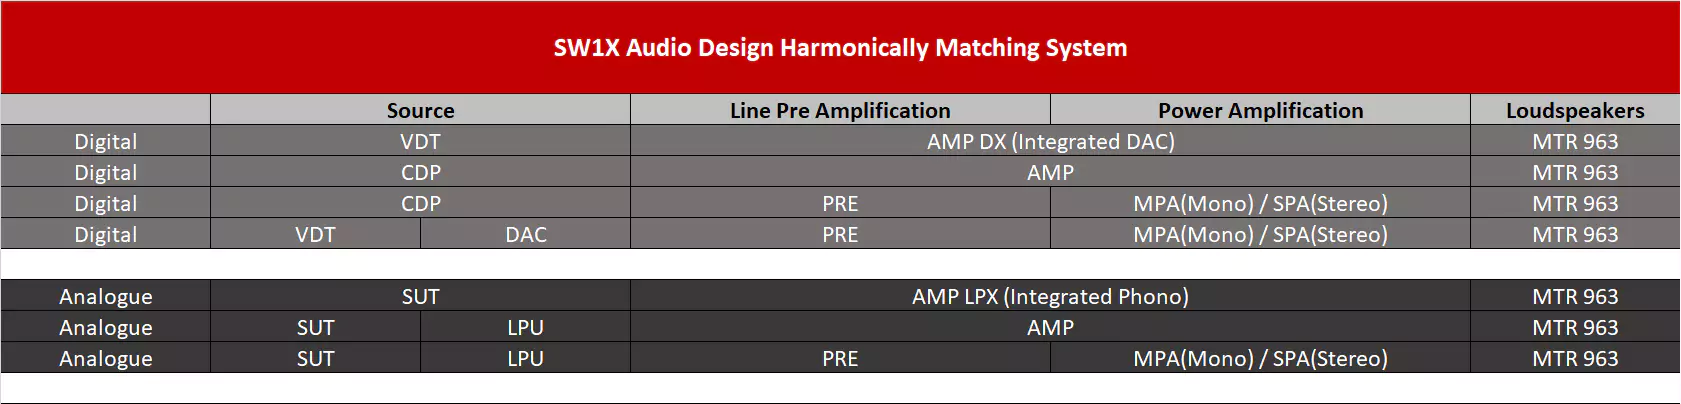 SW1X Audio Design Overview HiFi Reference System Guide 